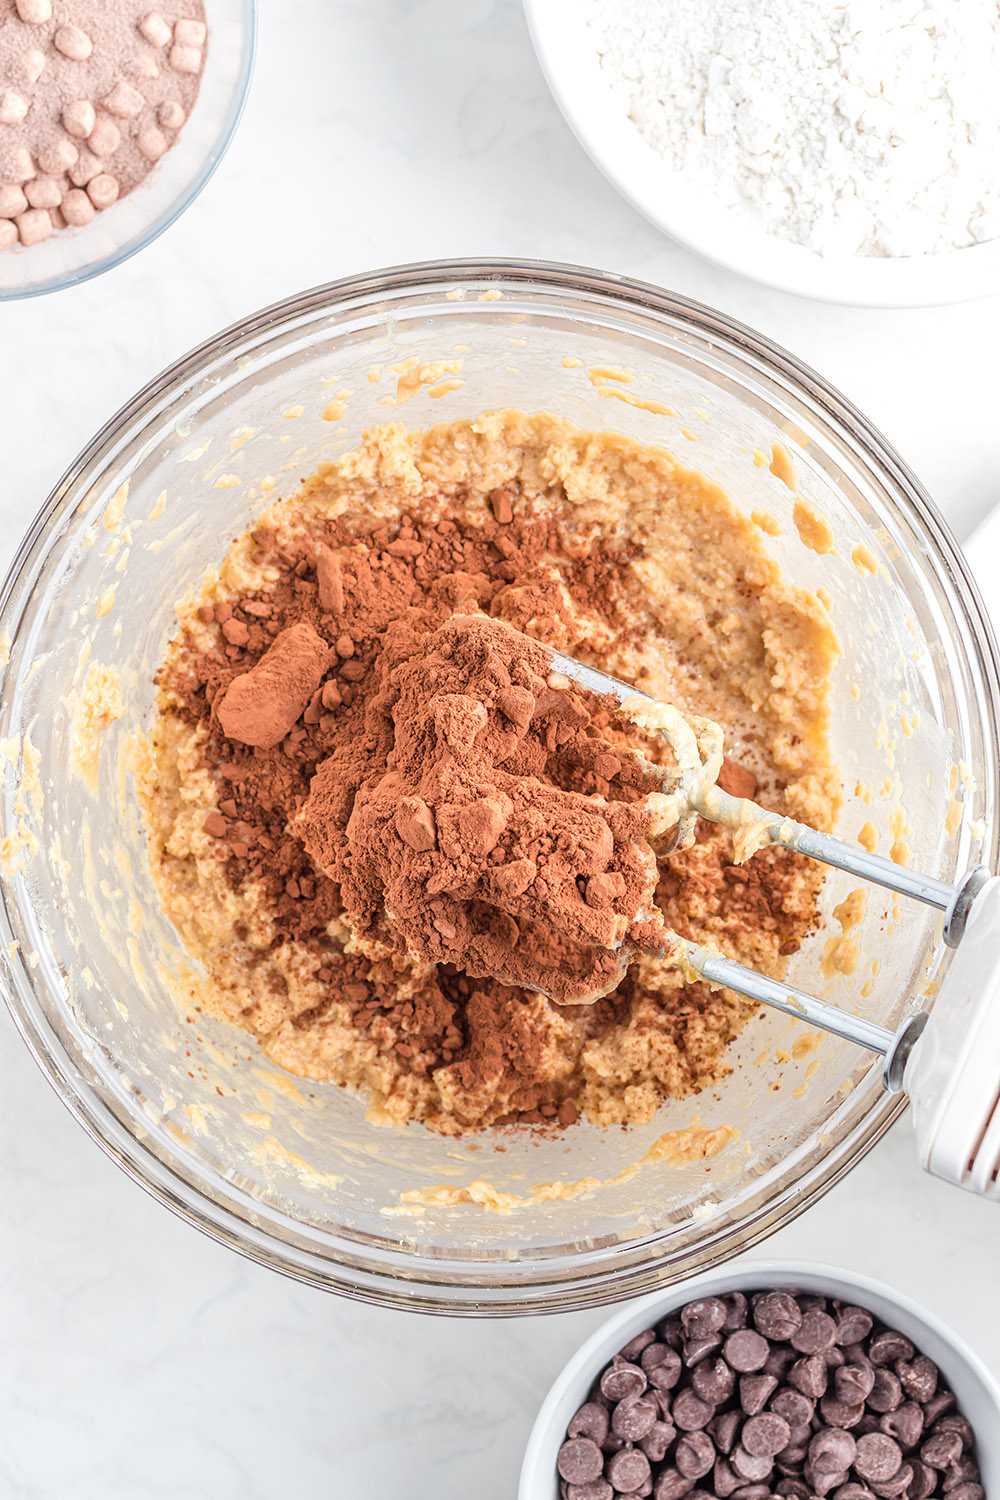 Cocoa powder added to batter in a bowl with a mixer.